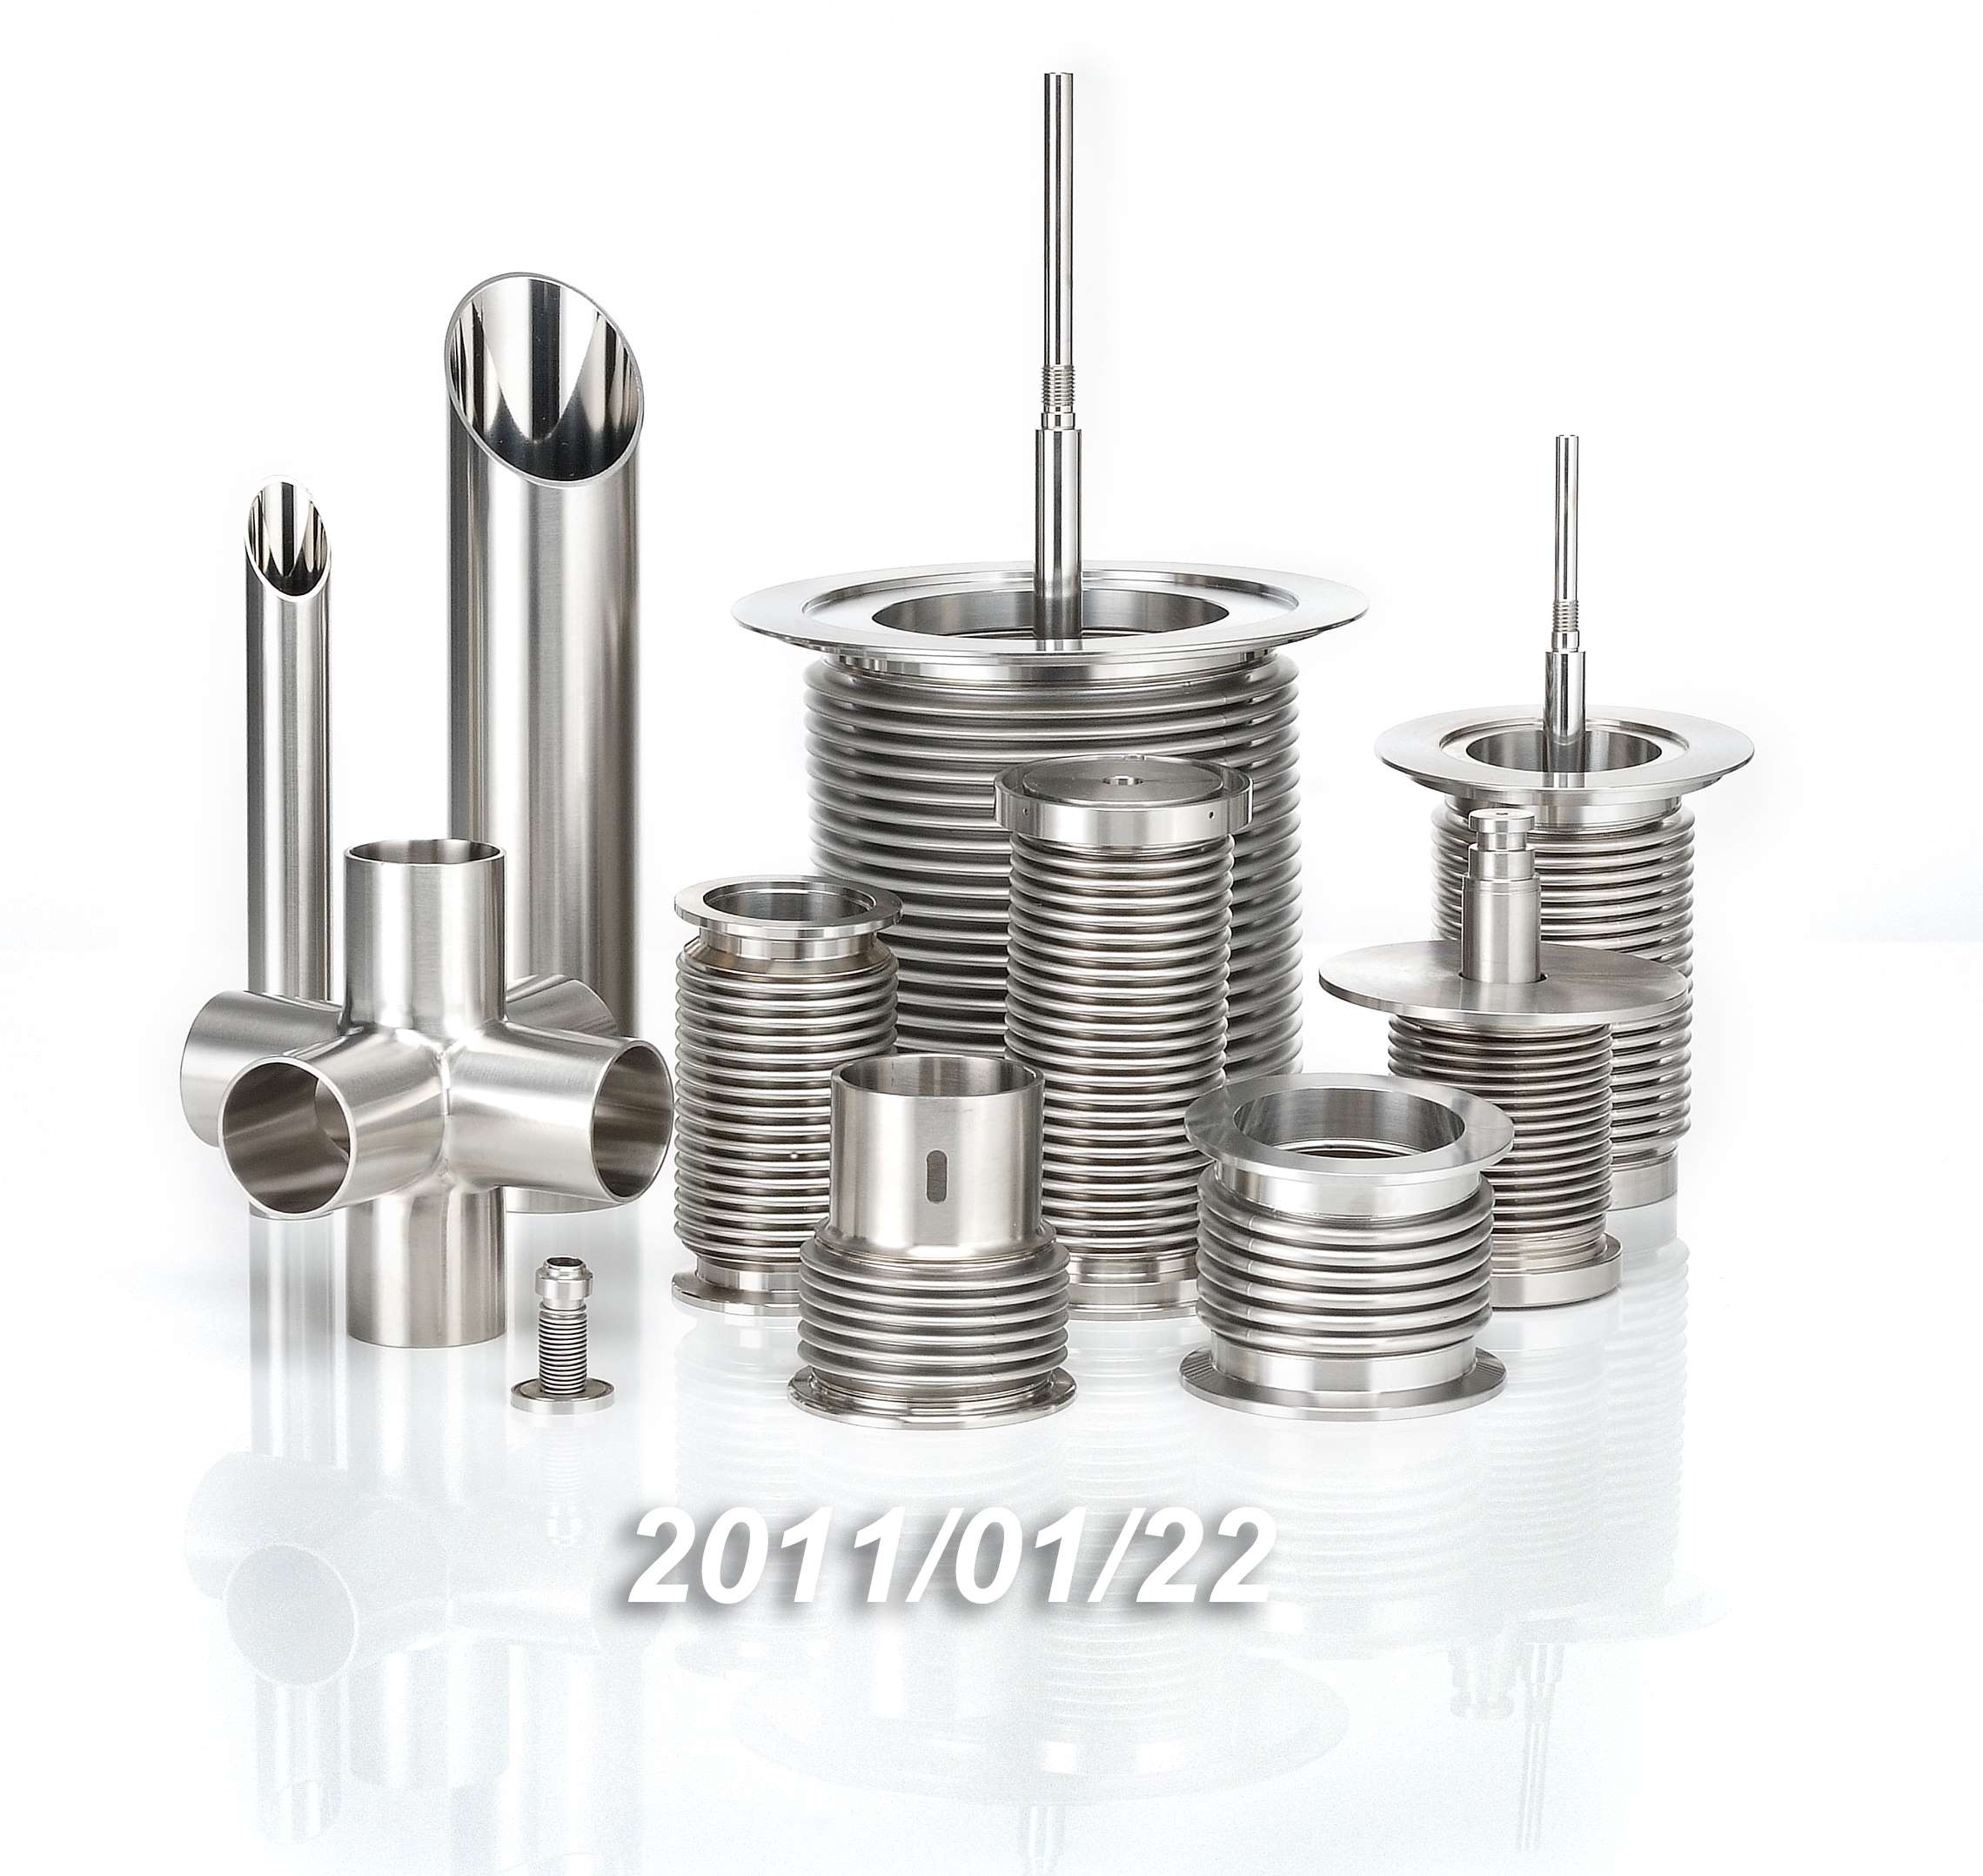 Qualified Connectors Manufacturer and Supplier